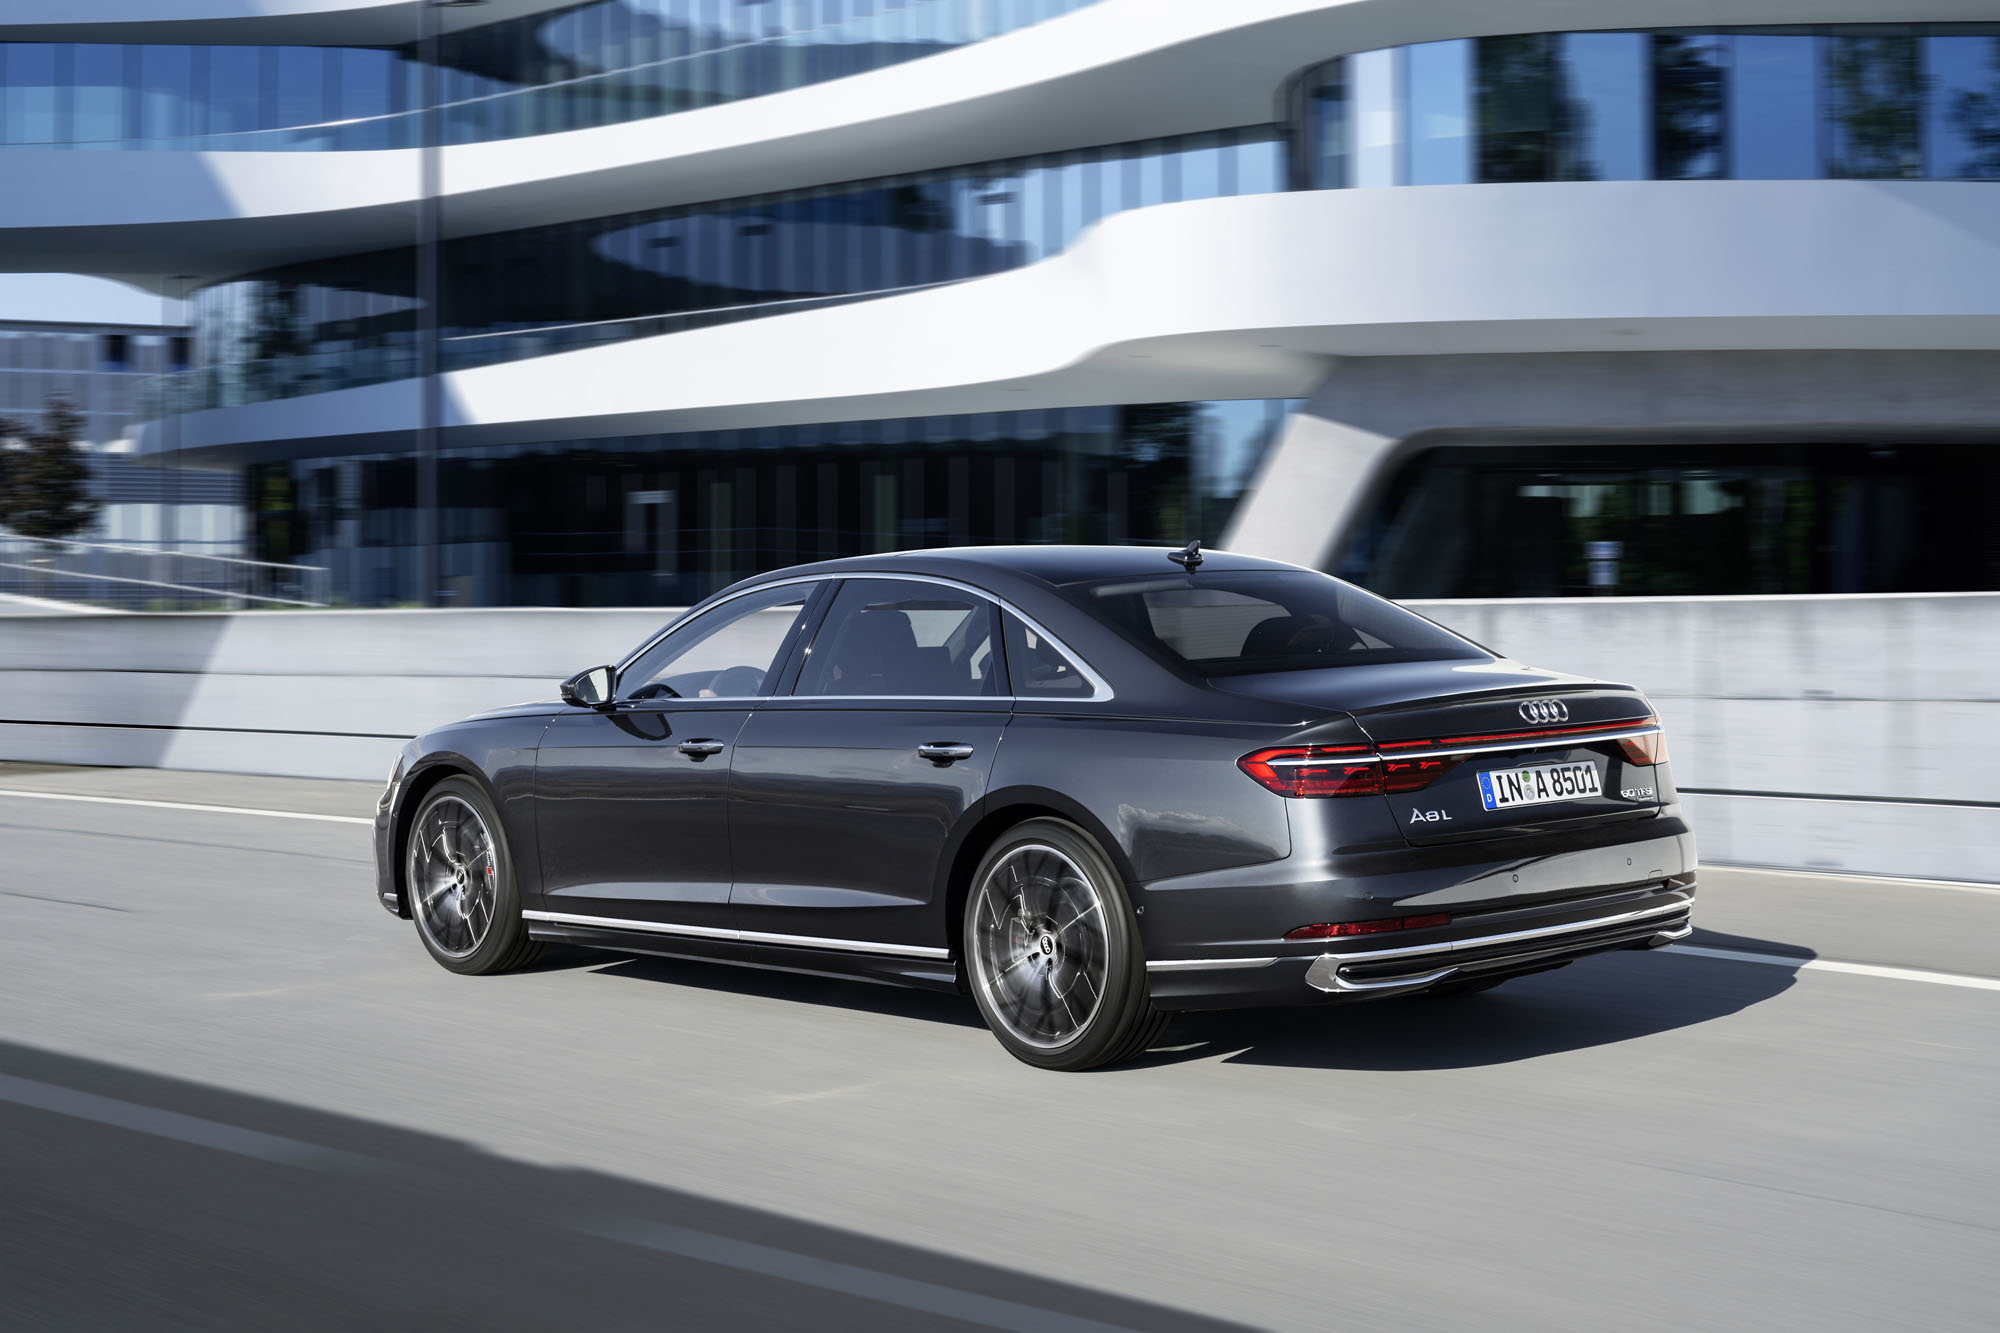 2022 Audi A8 And S European Spec Models Photo Gallery